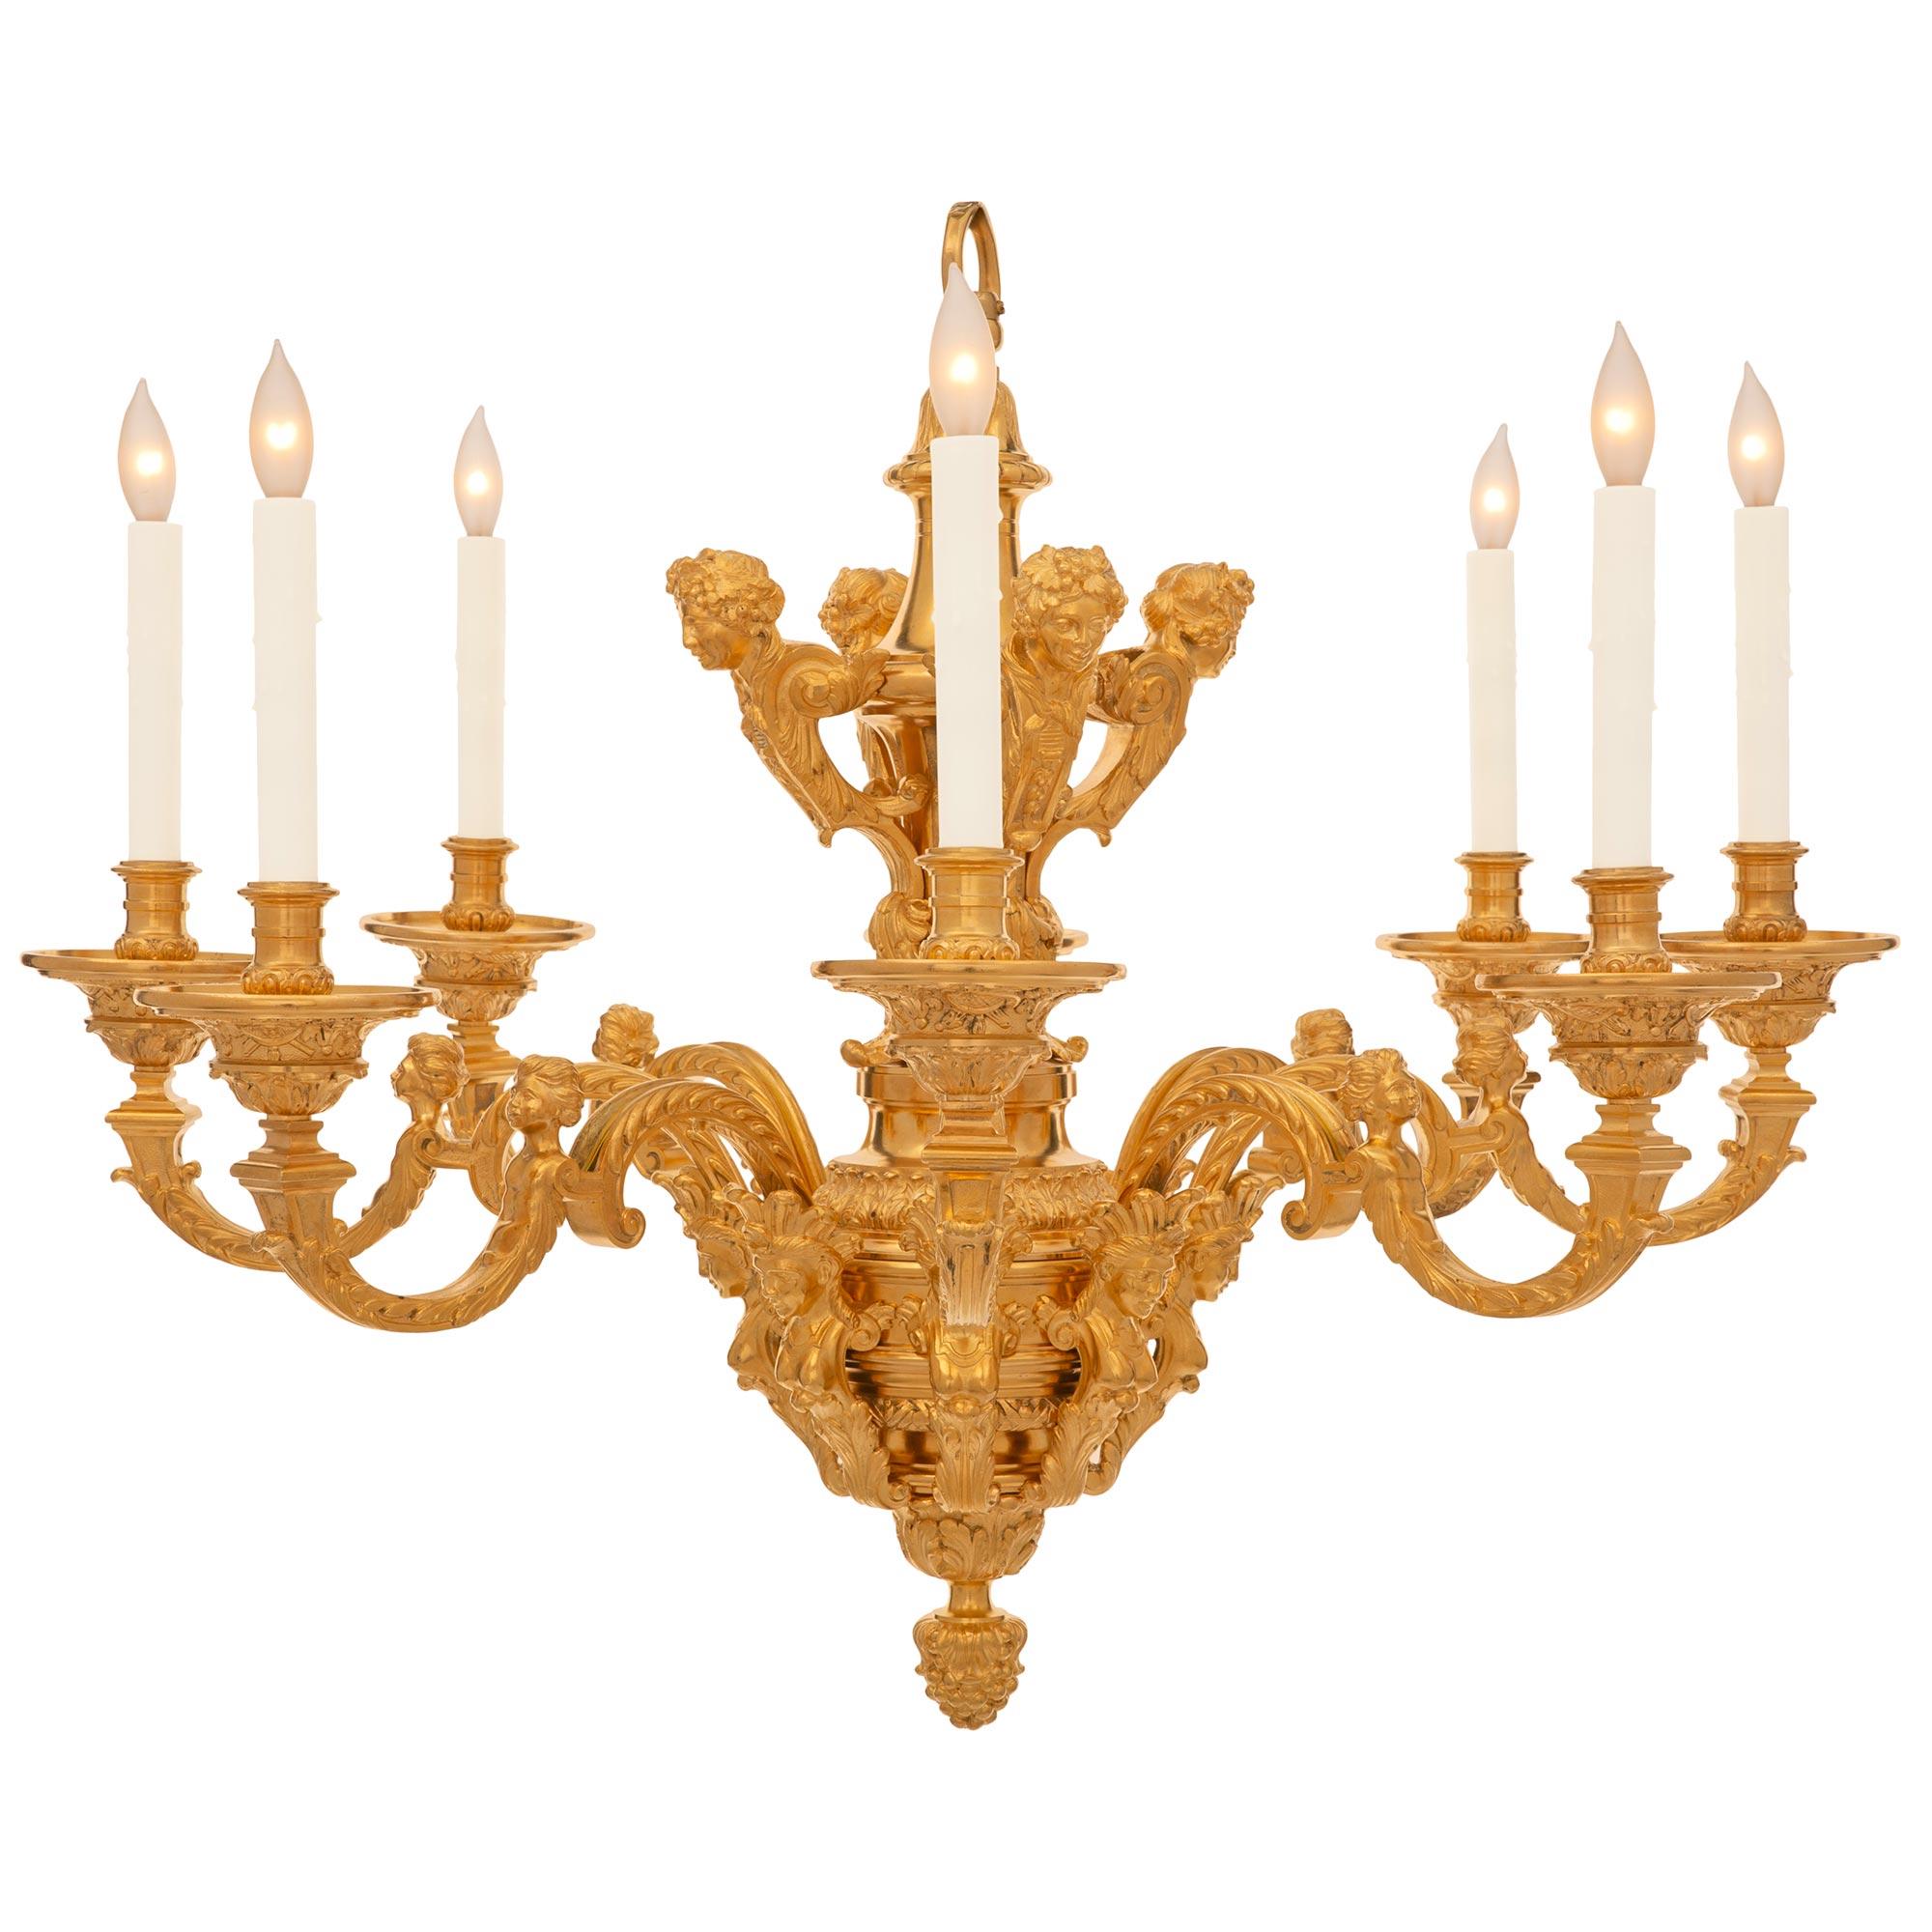 A handsome and very high quality French 19th century Louis XIV st. ormolu chandelier. The chandelier is centered by a fine bottom acorn finial below the mottled topie shaped body encased by finely detailed maidens. Each arm displays an elegant